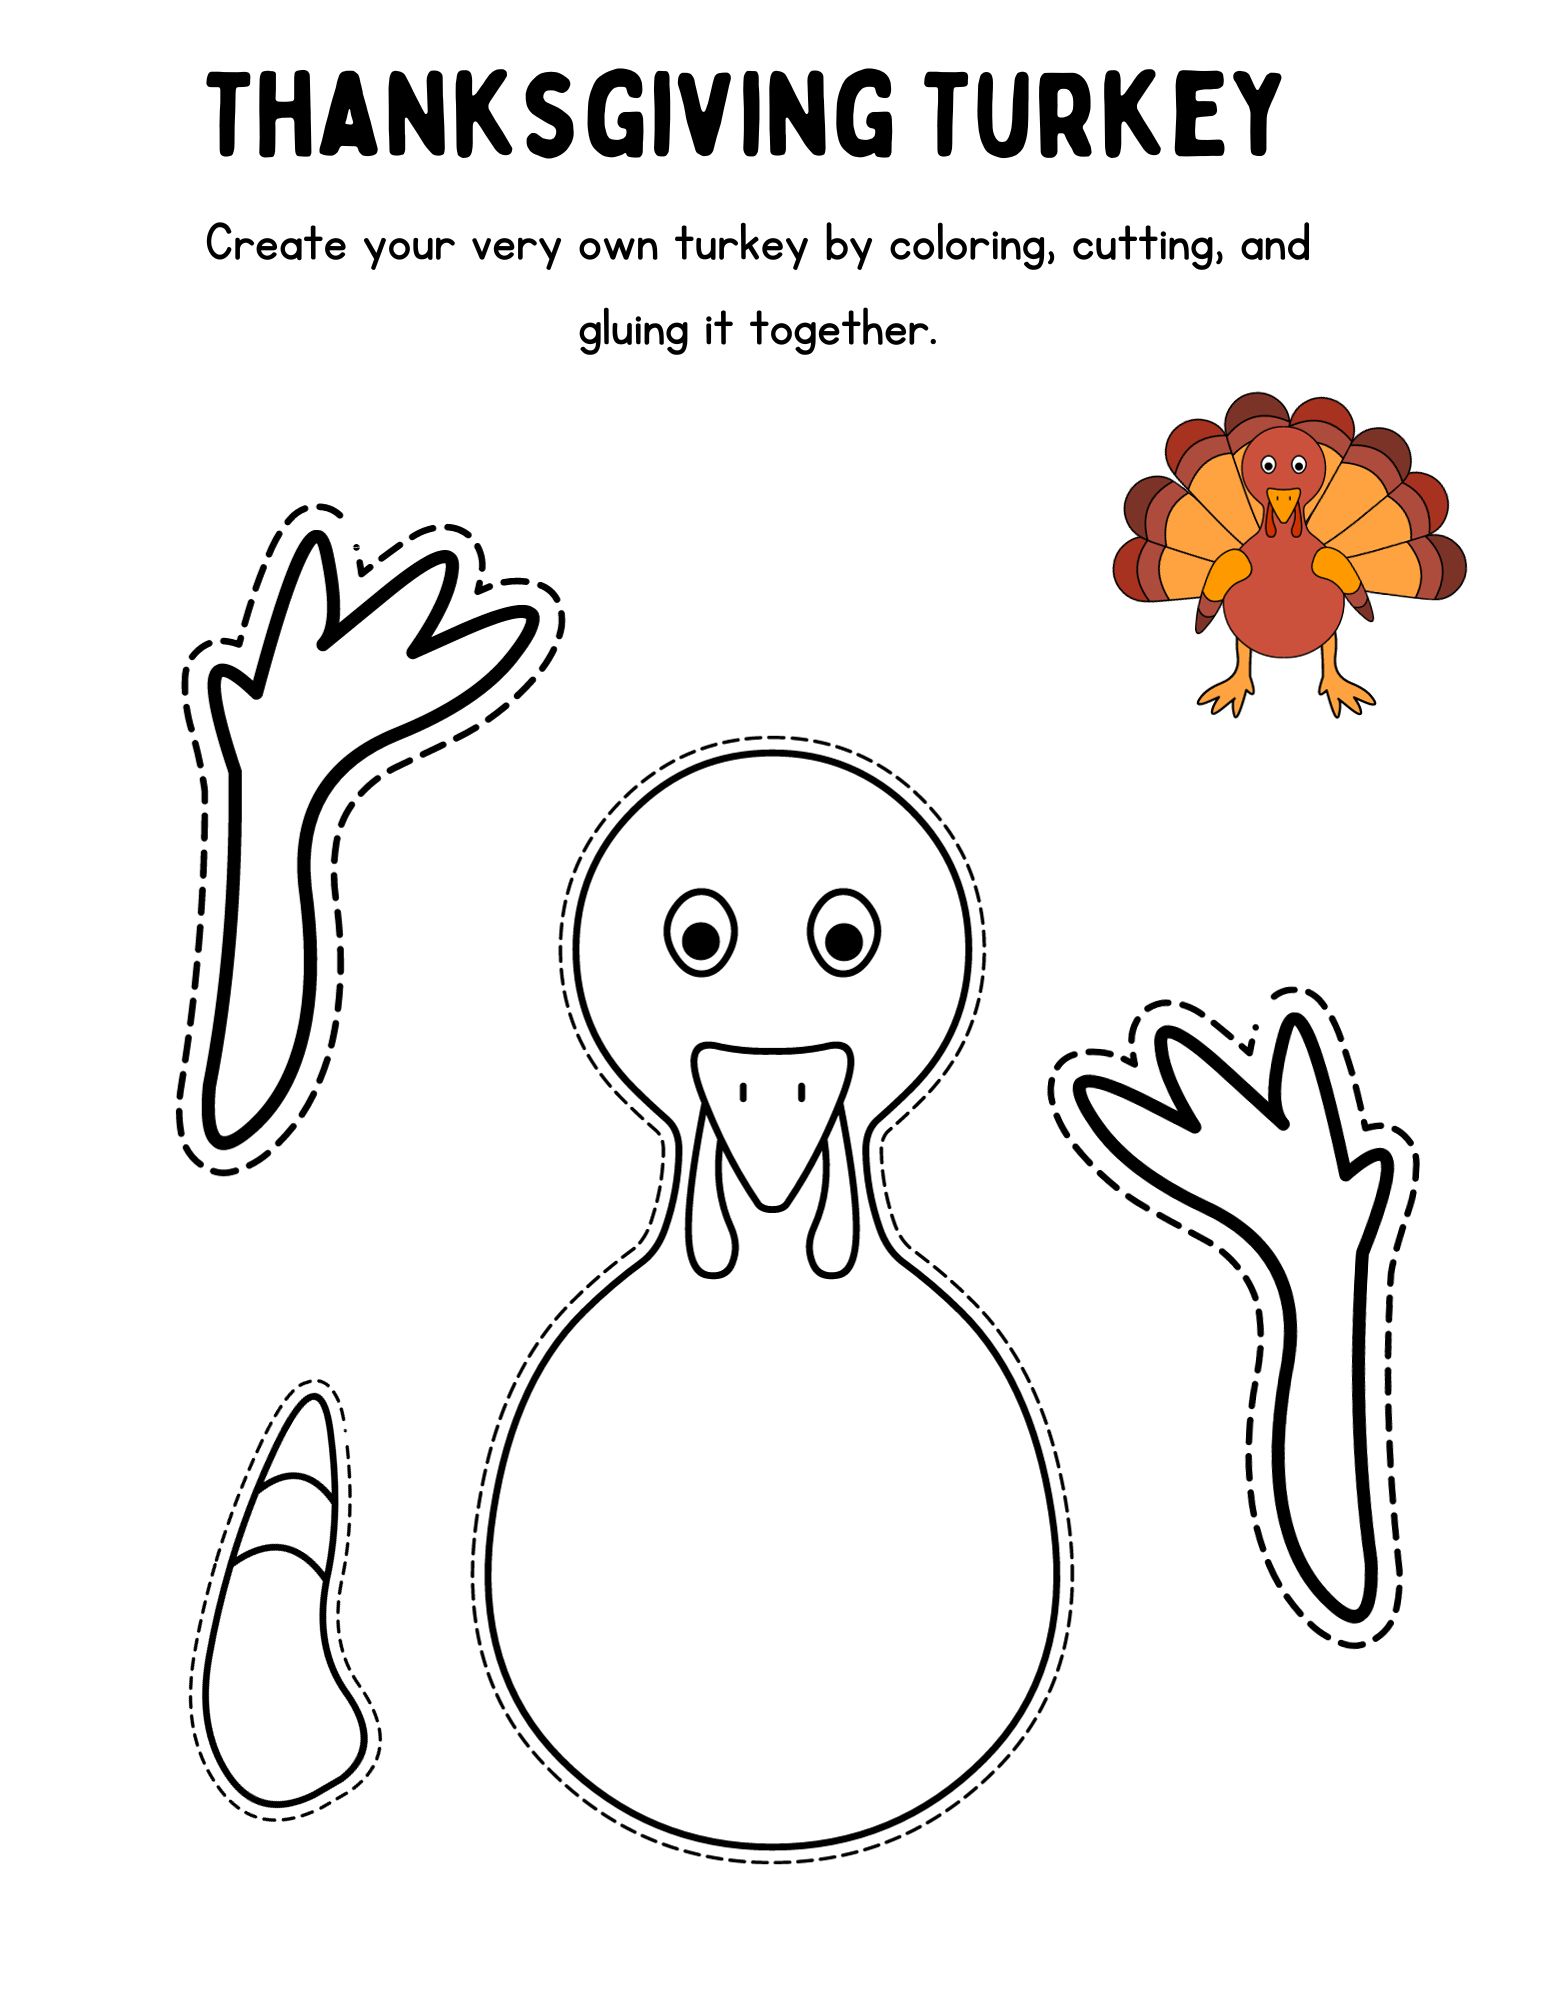 Thanksgiving Creativity with a Free Printable Turkey Templates - Amys ...